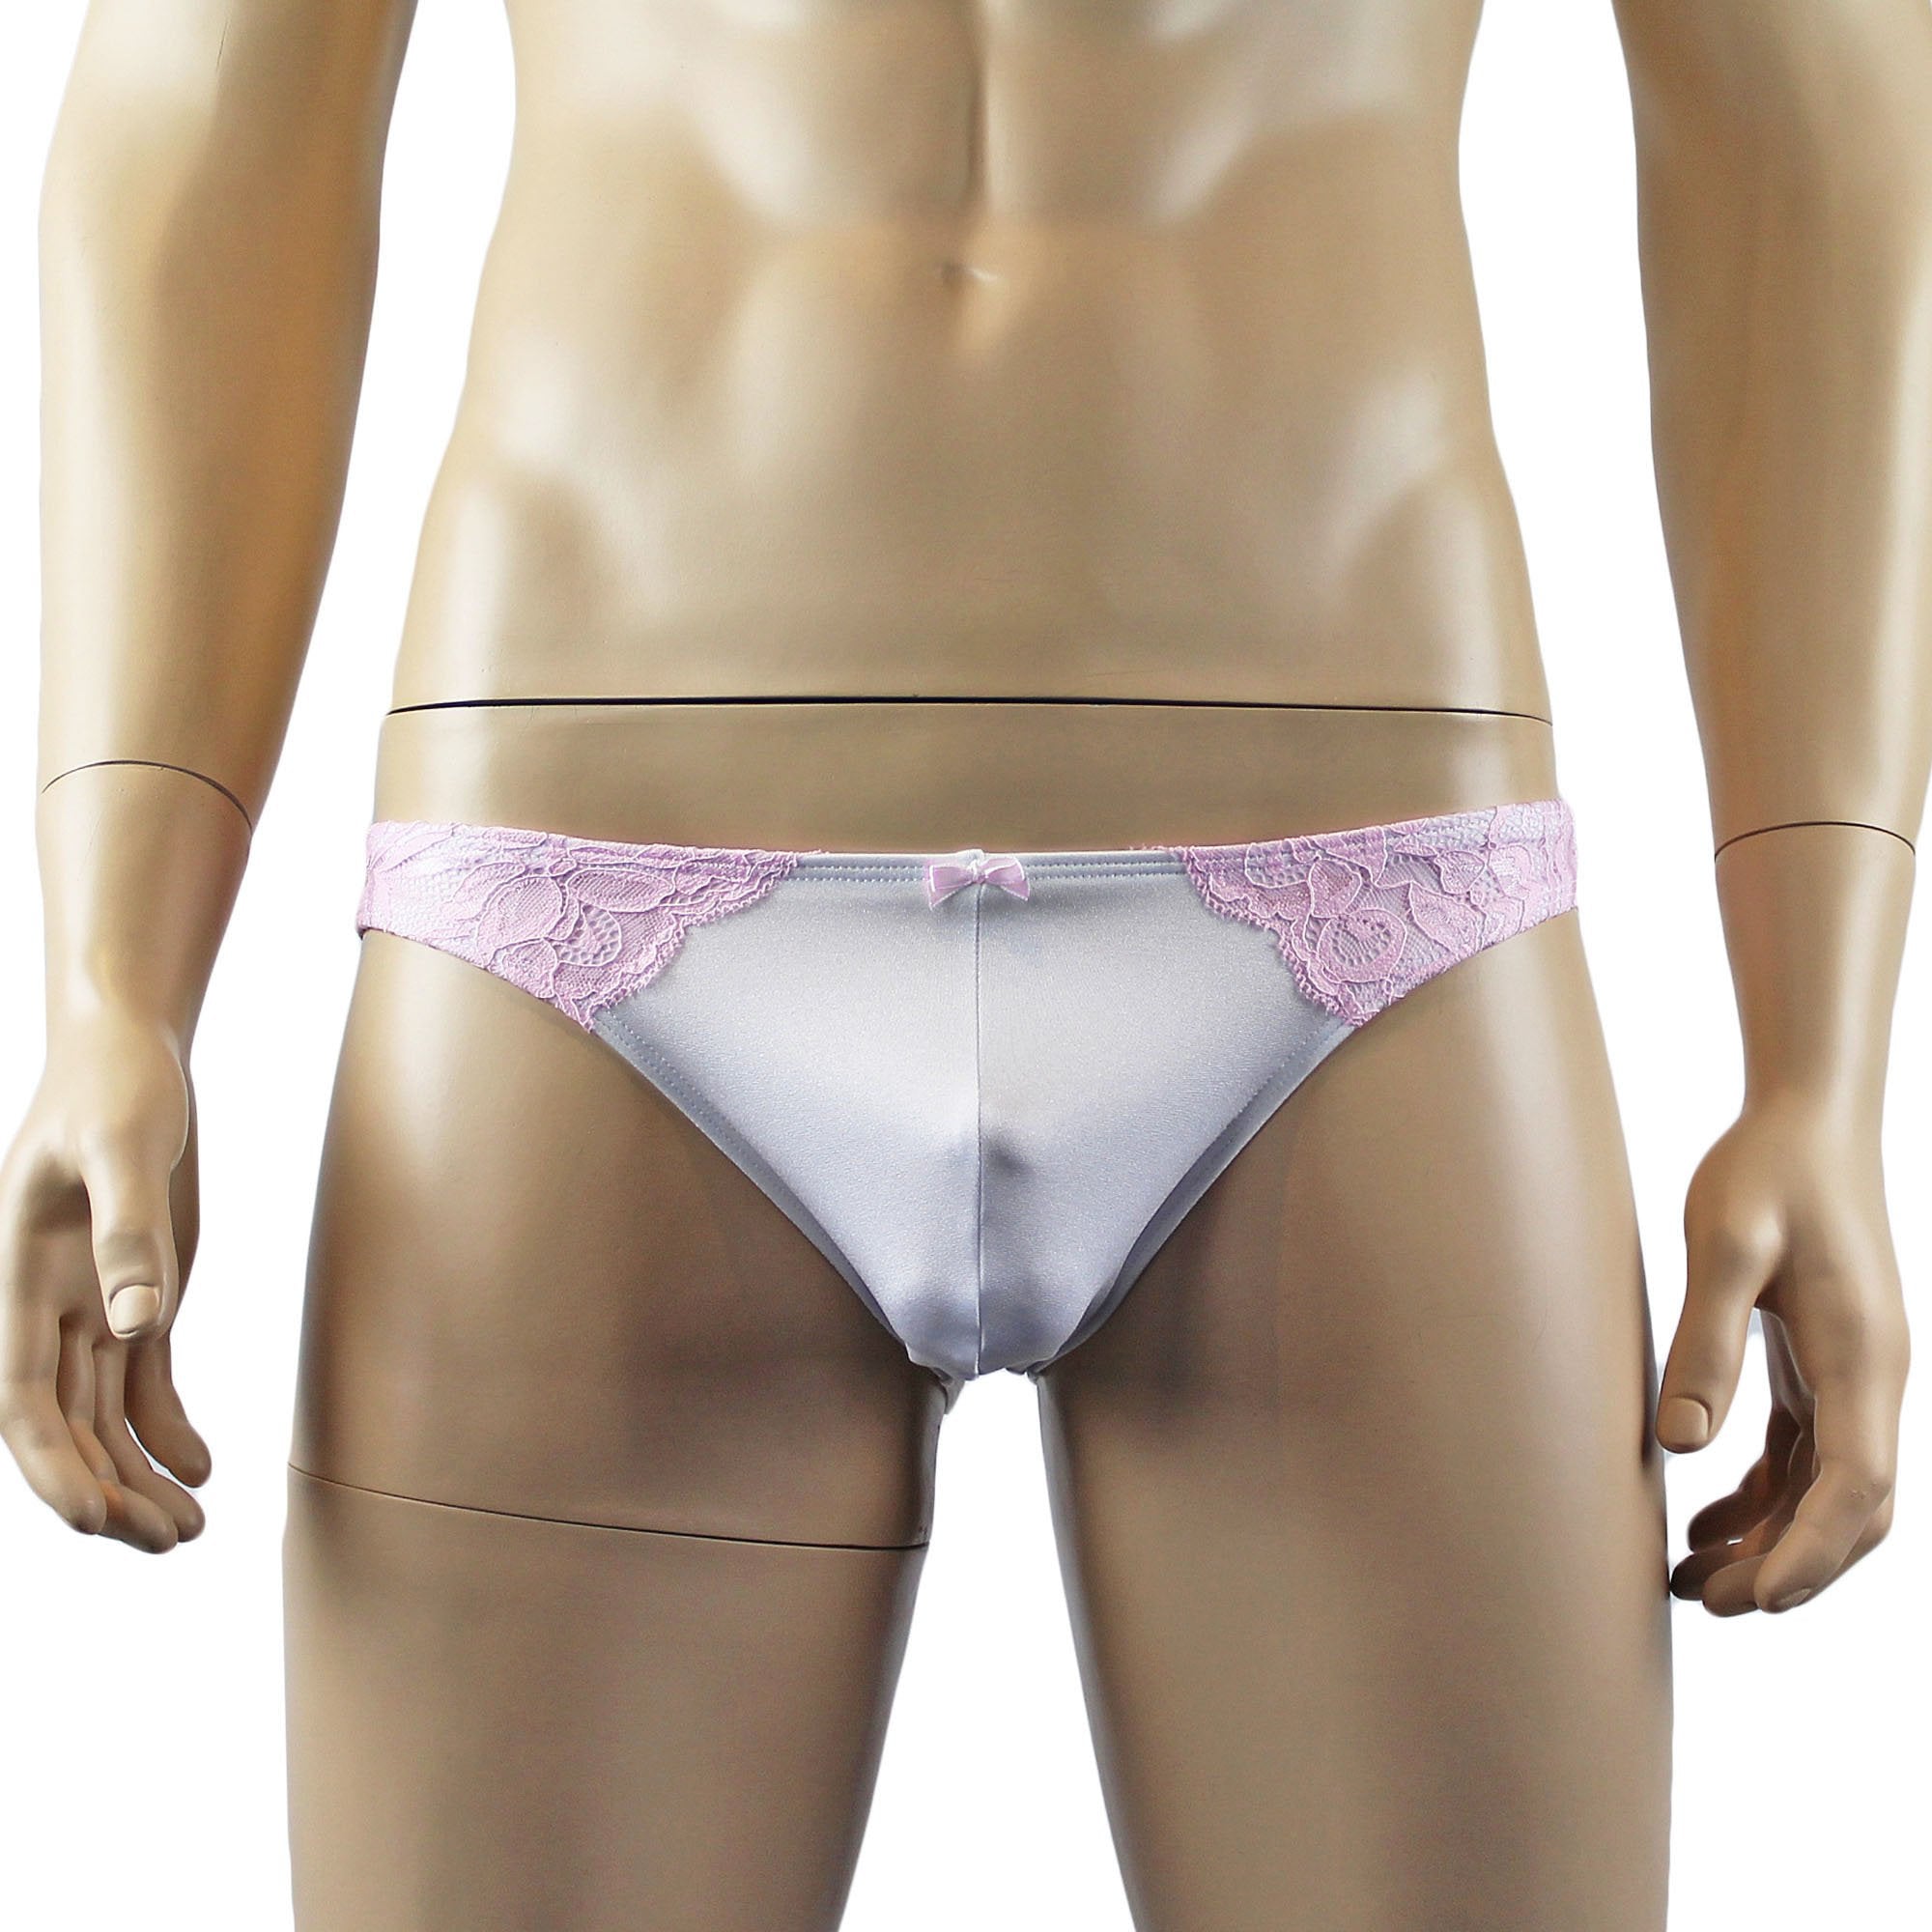 Mens Isabel Panty Stretch Spandex & Lace Bikini Brief with Sexy Back White and Pink Lace